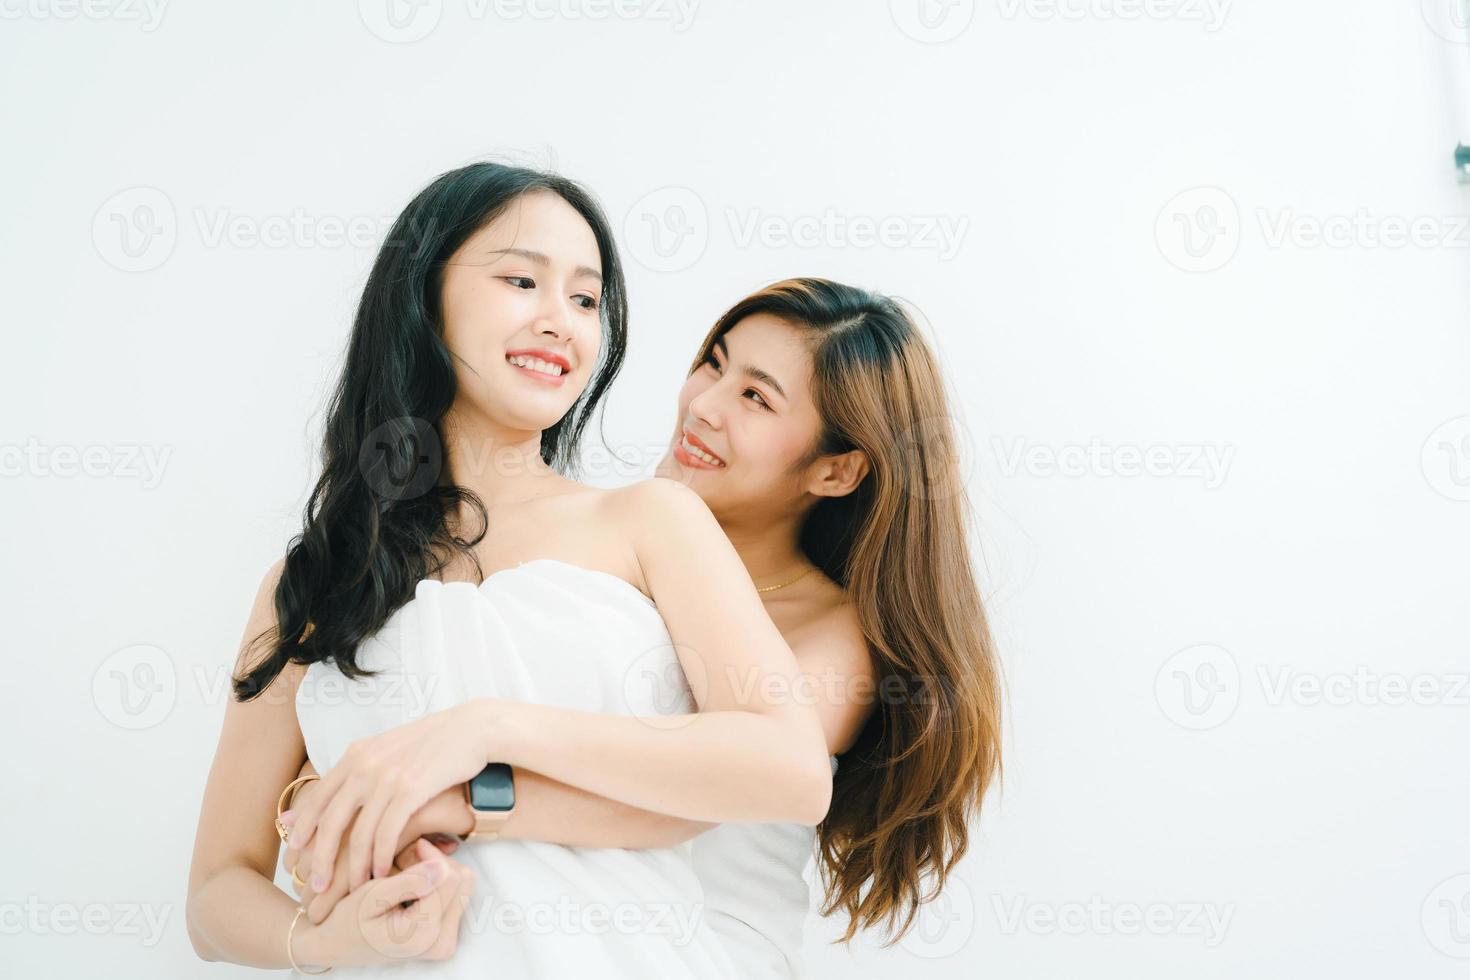 lgbtq, LGBT concept, homosexuality, portrait of two Asian women posing happy together and showing love for each other while taking a shower photo